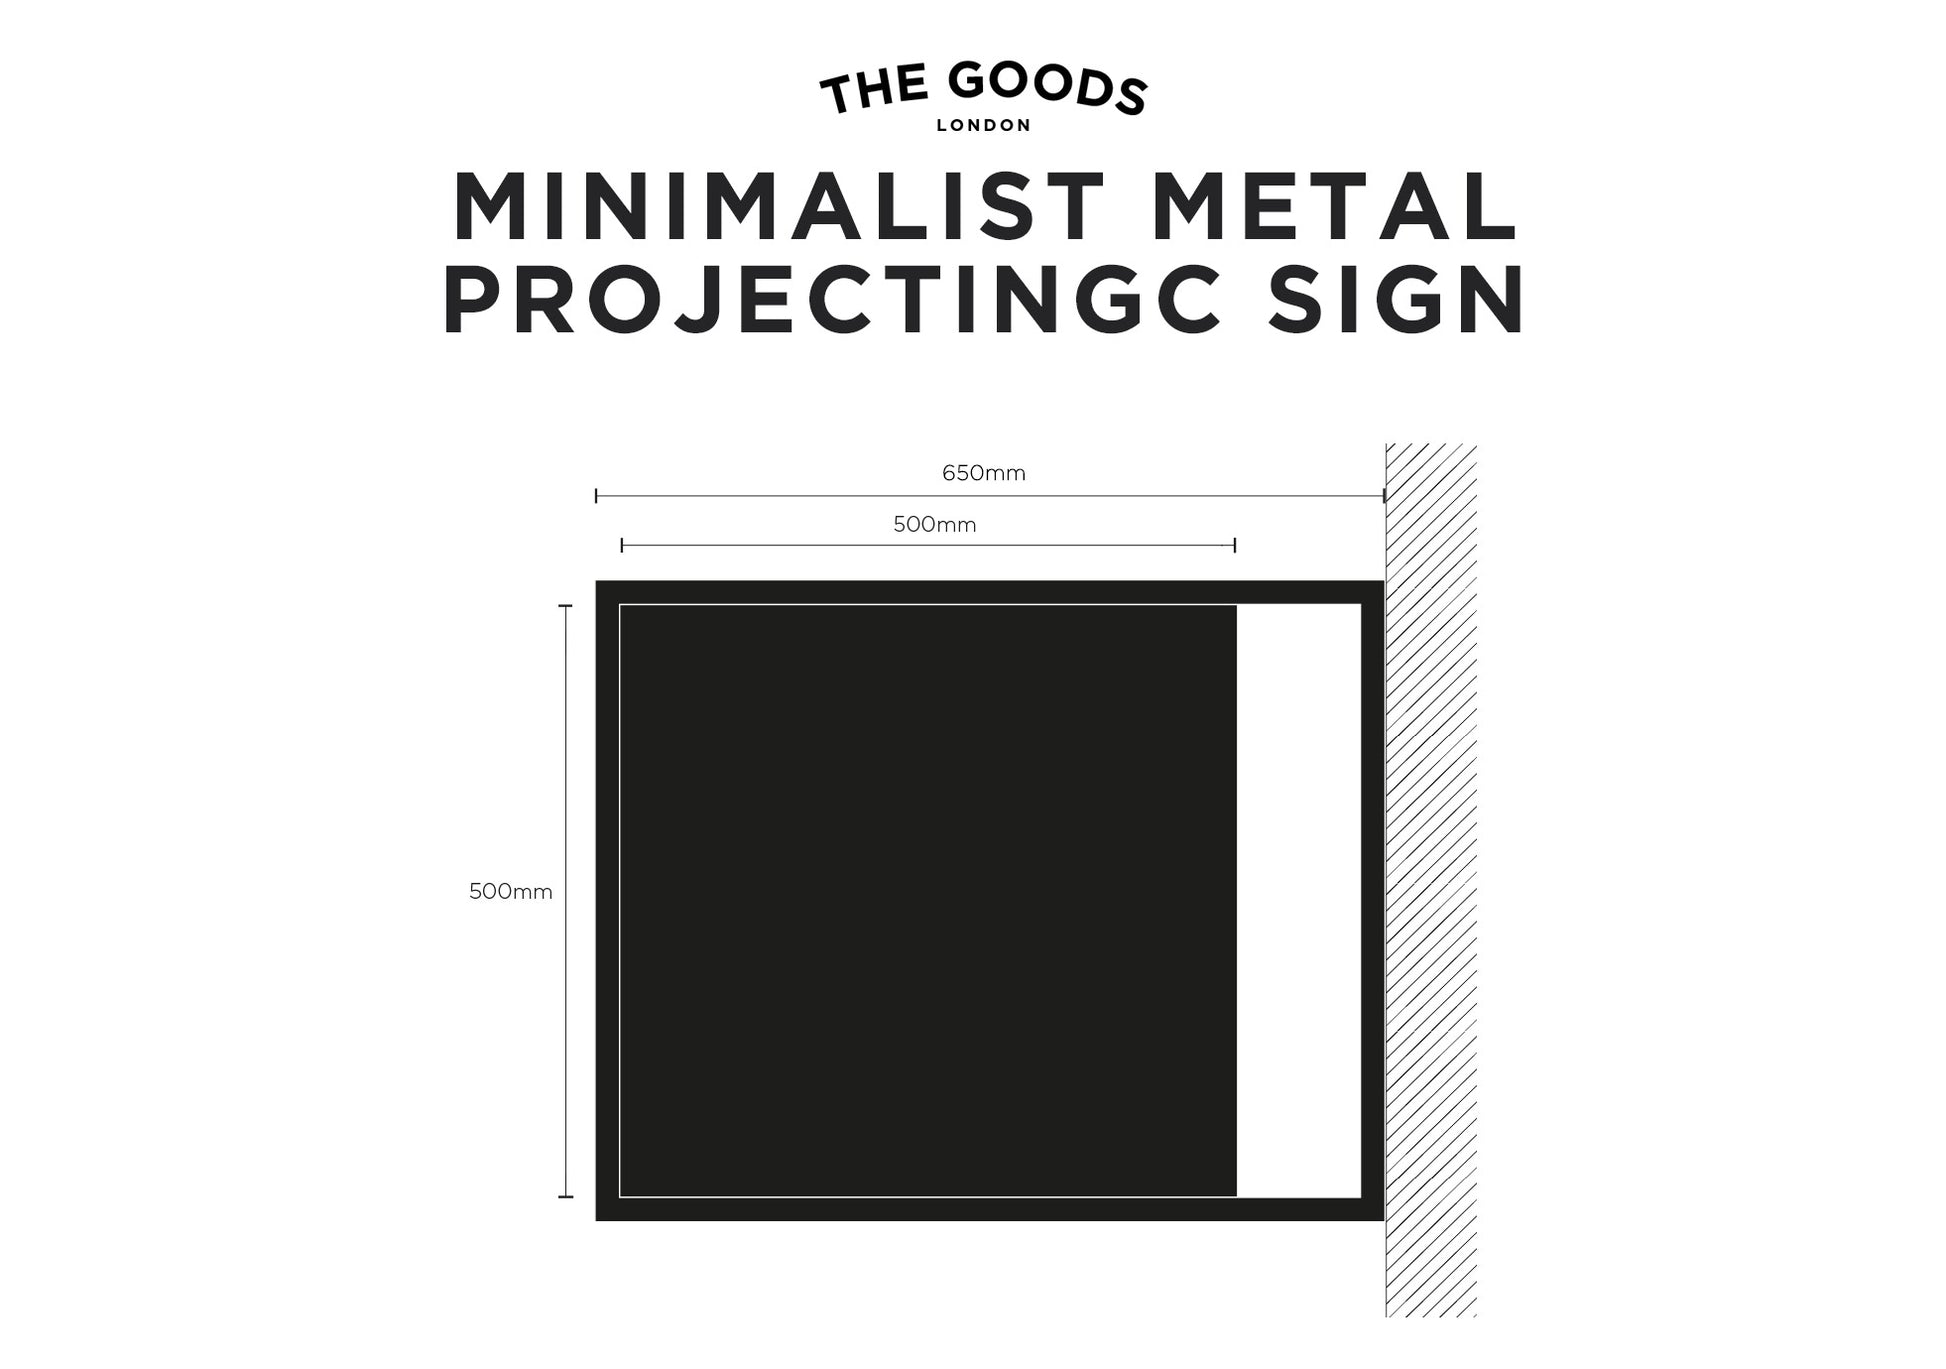 Minimalist Metal Projecting Sign Technical Drawing